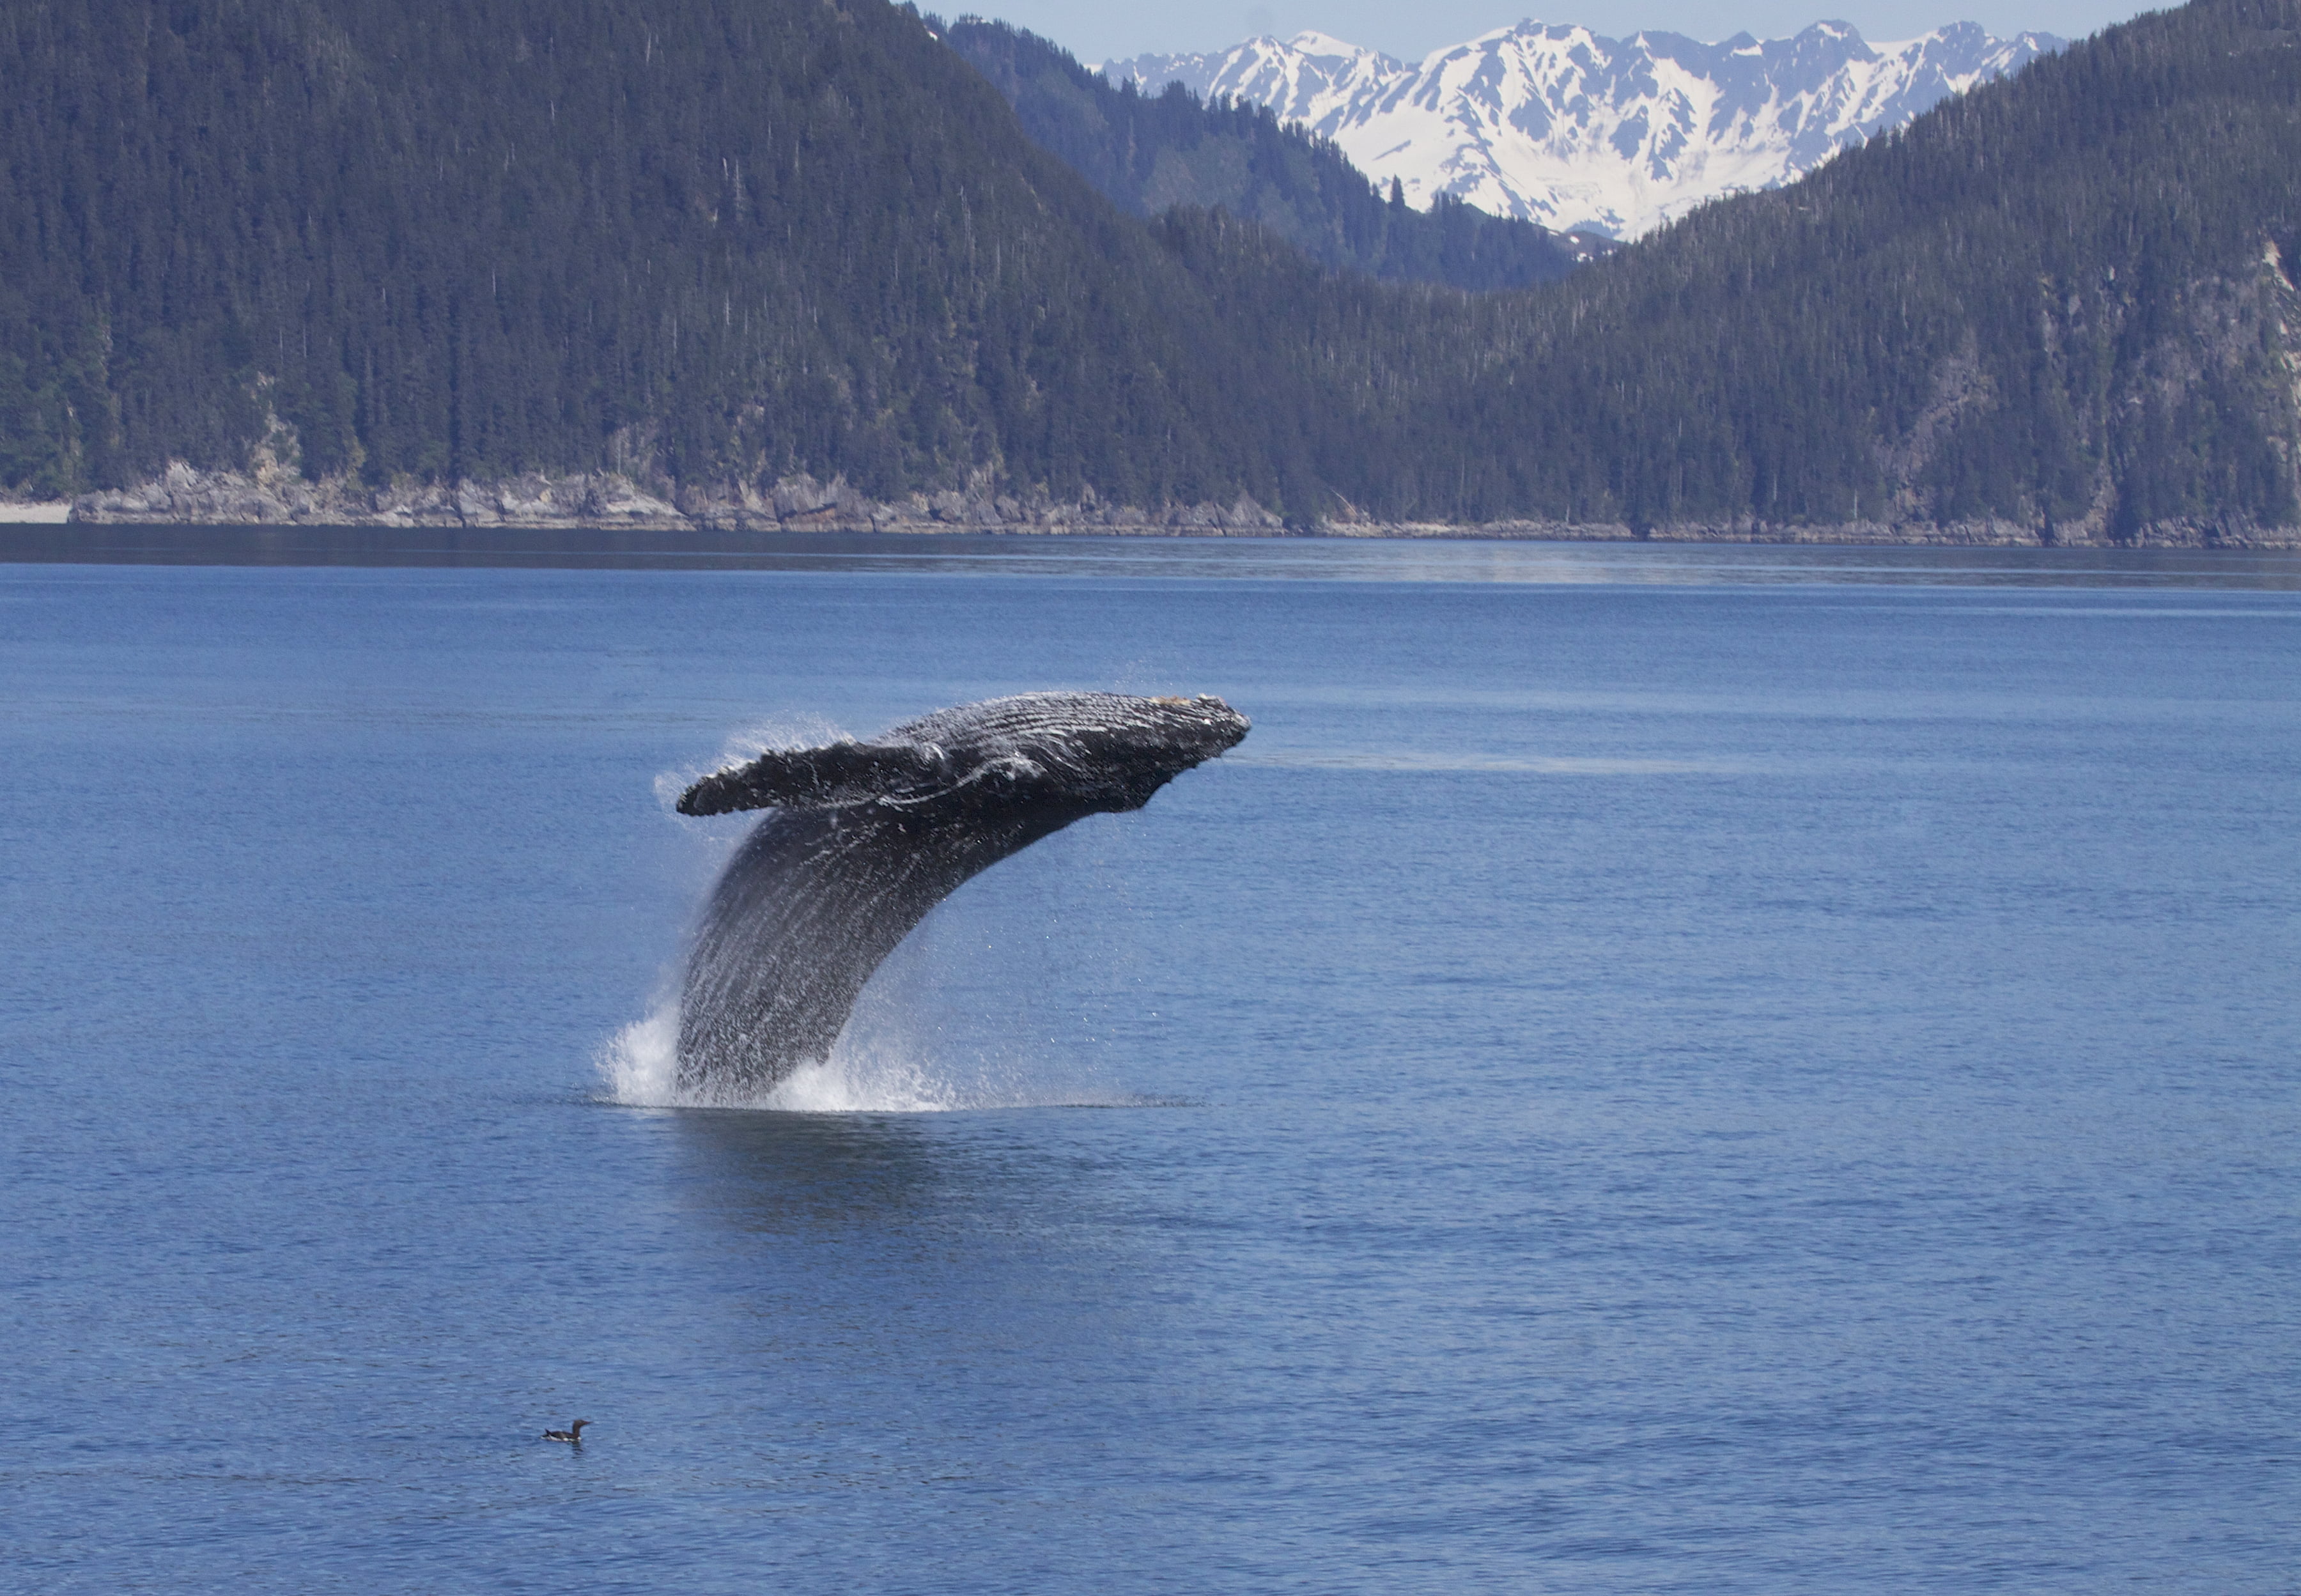 2048x1536 resolution | Whale jumping from ocean, humpback, megaptera ...